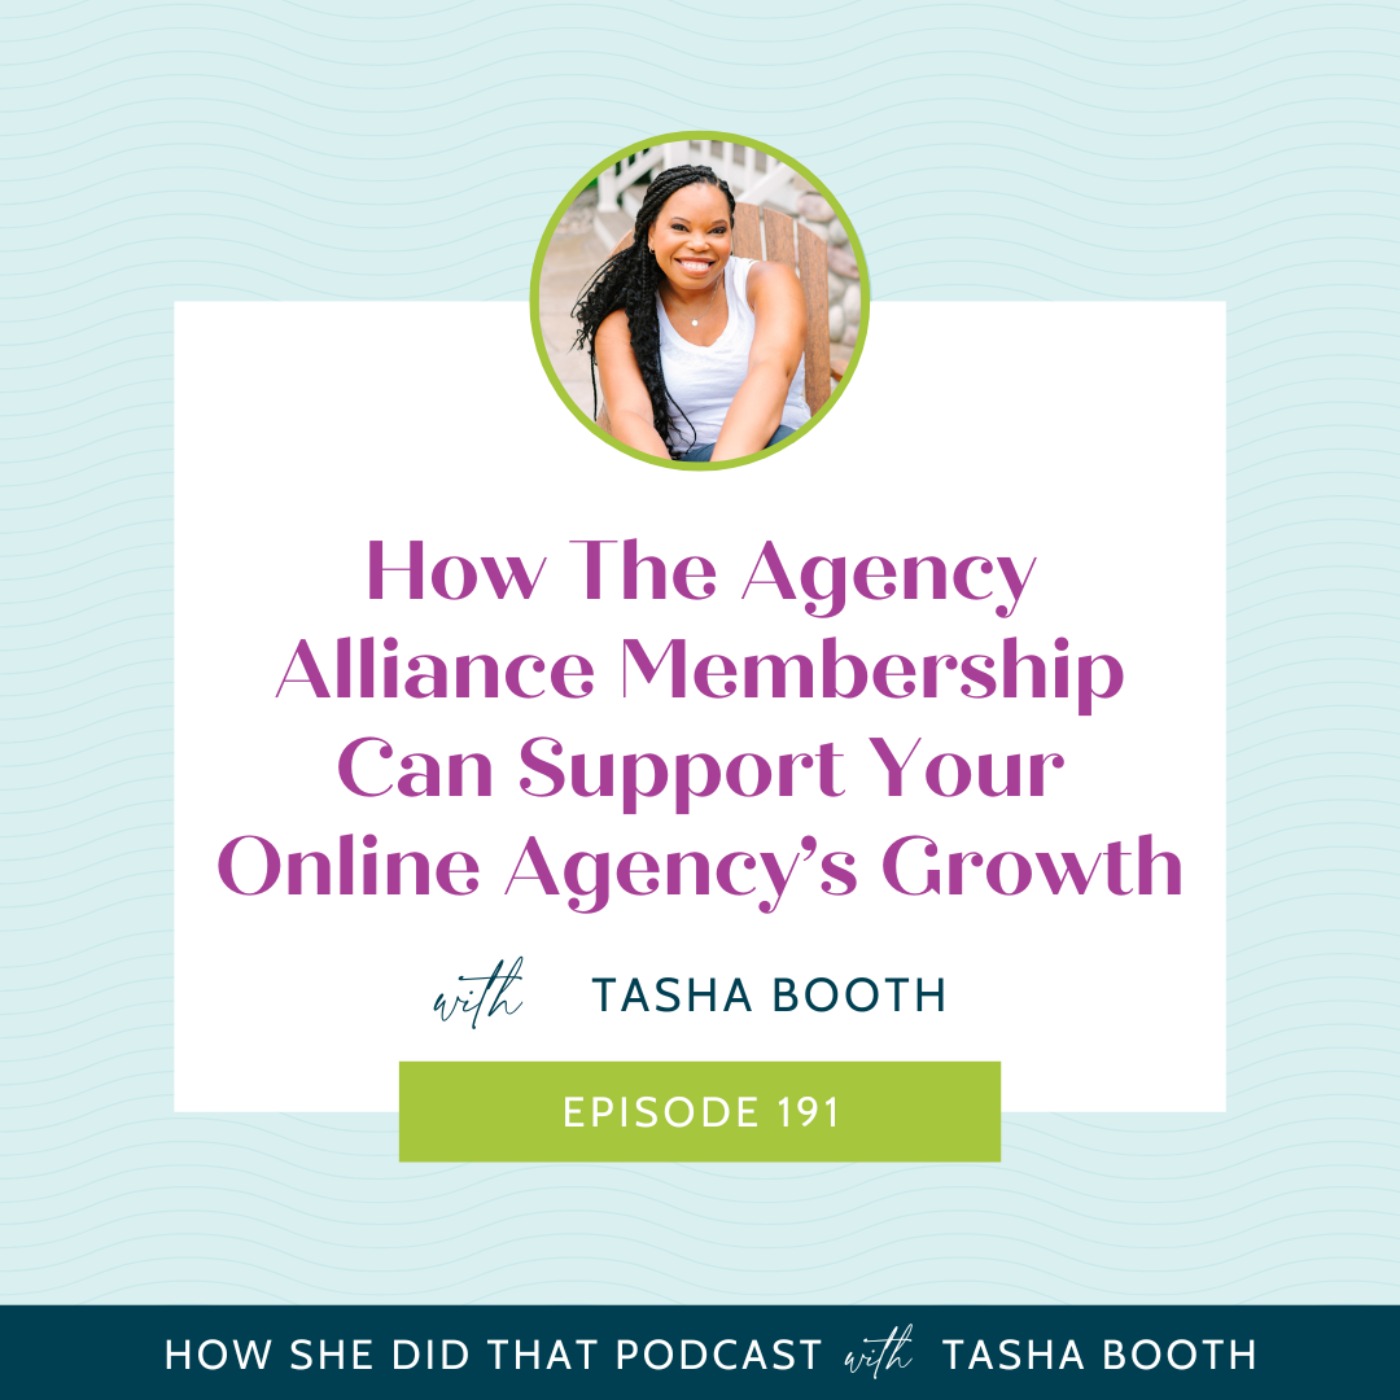 How The Agency Alliance Membership Can Support Your Online Agency’s Growth